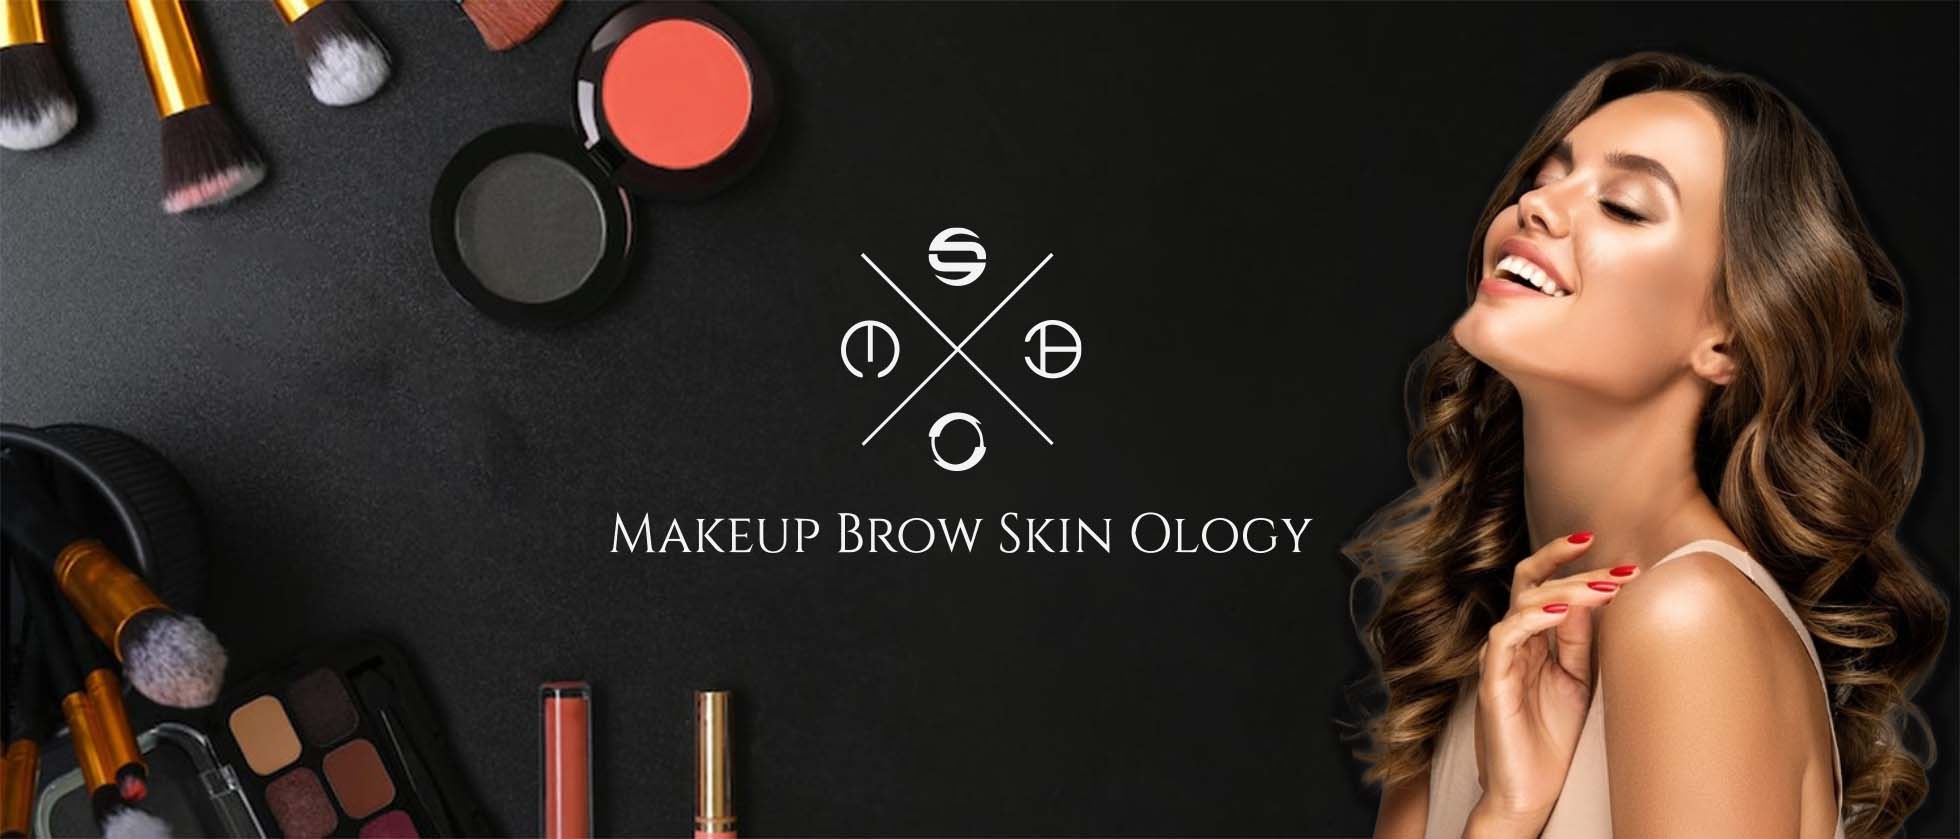 gaffel Mesterskab konsulent Makeupology - Affordable Quality Cosmetics Made In USA – Makeupology Store